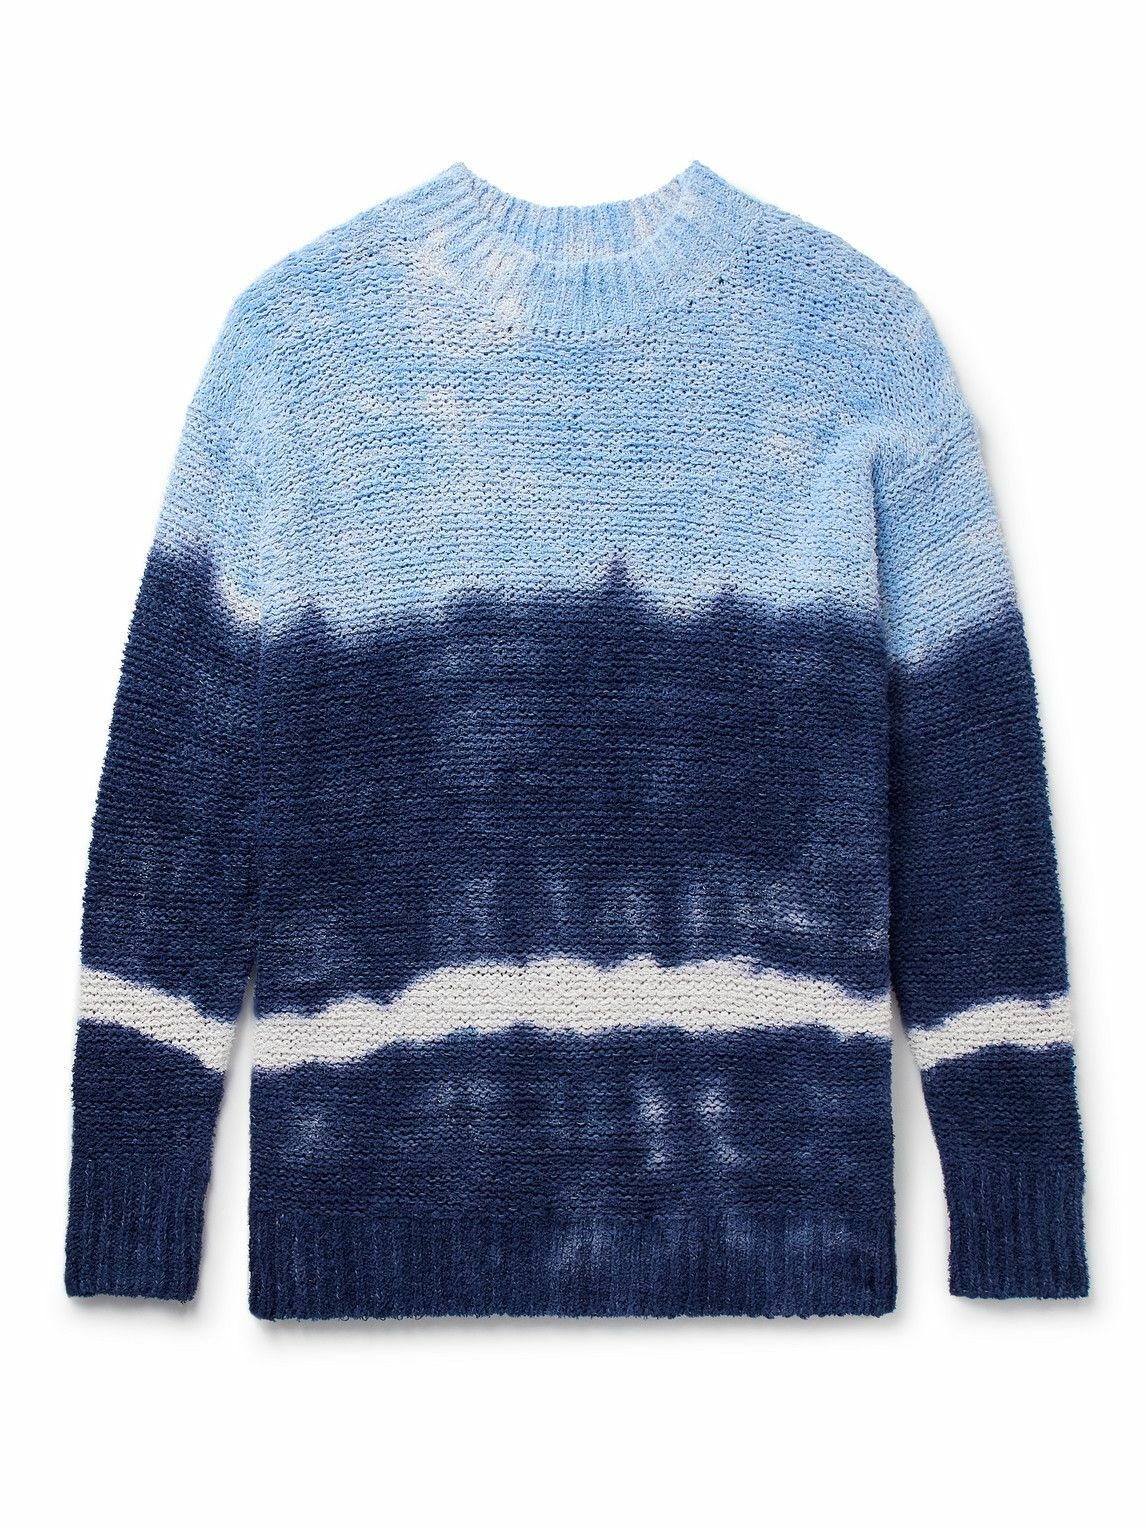 Photo: Isabel Marant - Tie-Dyed Cotton-Blend Sweater - Blue